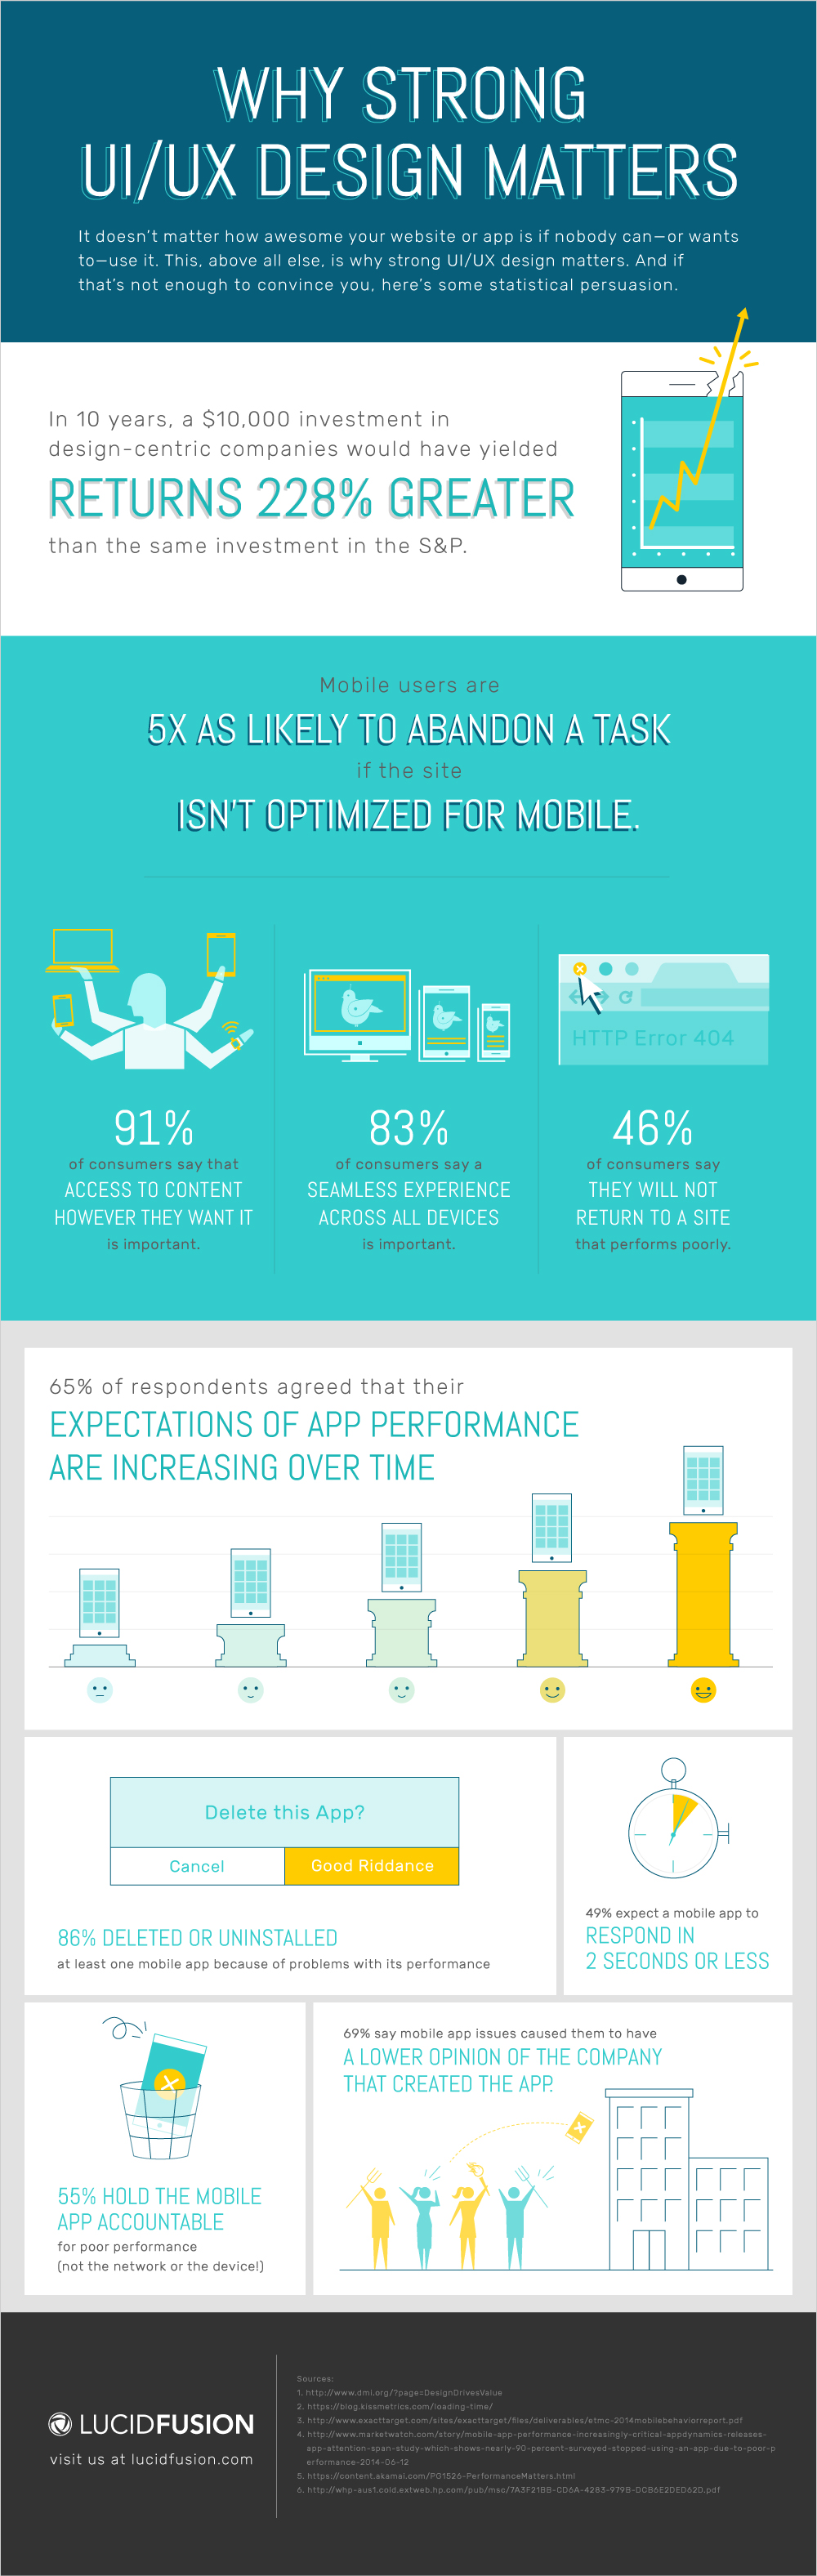 LucidFusion_Why_UI_UX_Matters_Infographic